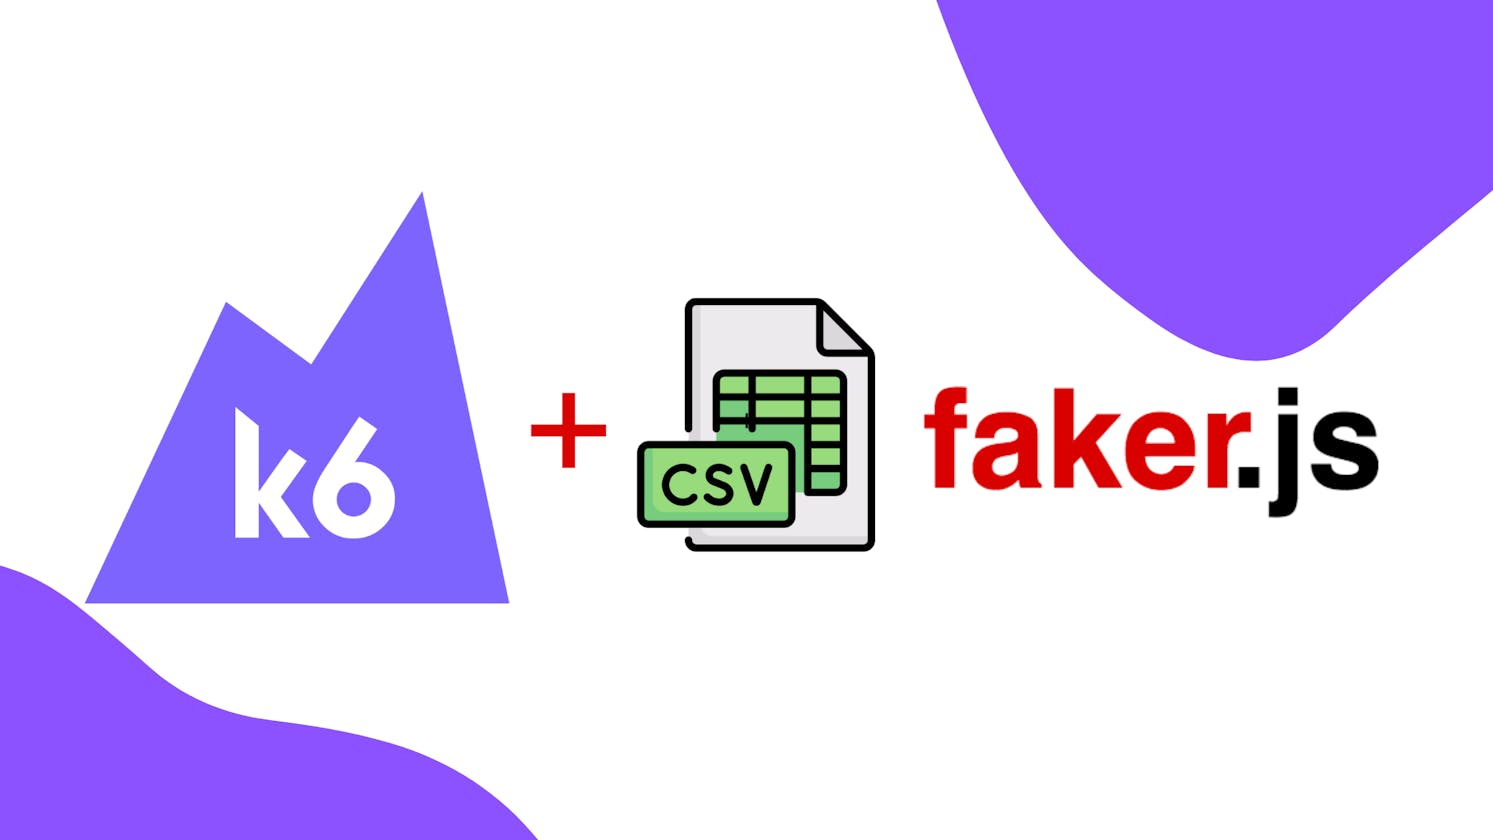 Load Testing Made Easy with K6: Using Faker Library and CSV Files